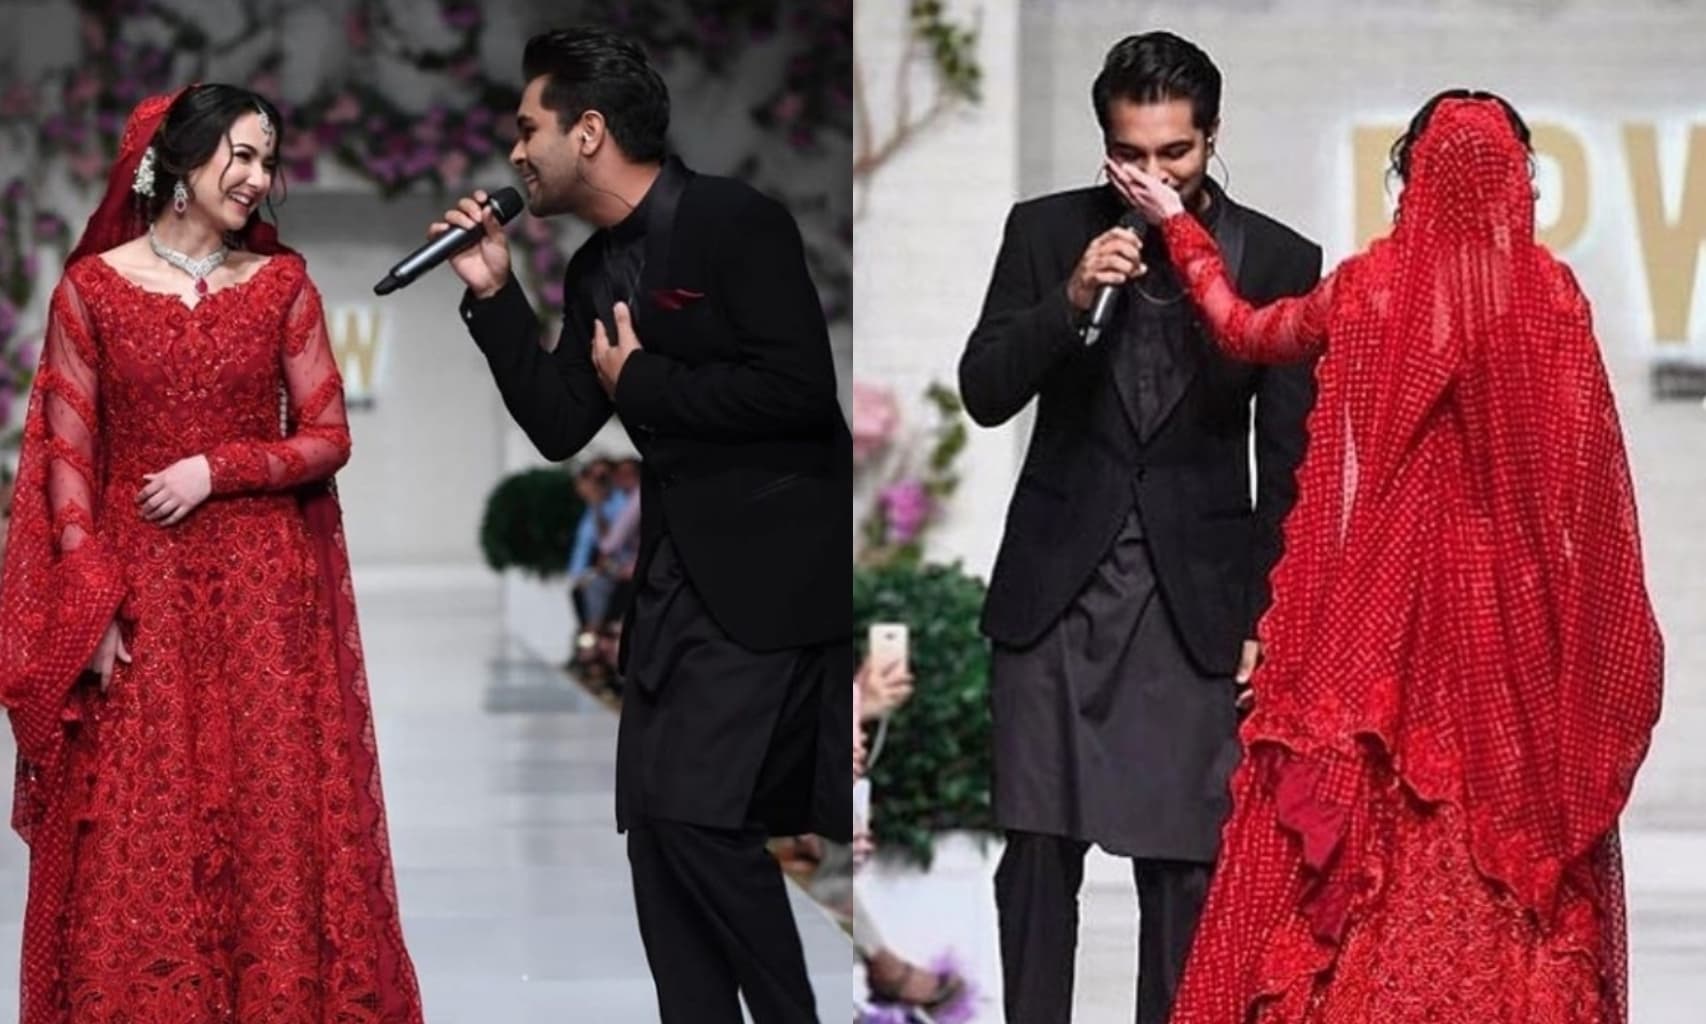 Asim Azhar and Hania Amir have been playing some sort of a game on Insta. First, we saw them swooning all over each other at every function and event. Then, we got the news through Hania that she and Asim are just friends and nothing more. This blew up all over social media, and both were bombarded with questions. Within a few days, we saw the two together again in a friend’s gathering and were questioning as to what their relationship status is exactly? Looks like, months later, we are still questioning the same. In a recent stint that Asim has pulled off, it looks like this is IT for the couple and there is nothing left anymore. What Did Asim Azhar Do? Just recently, Asim Azhar has unfollowed Hania Amir from her Instagram account. Not just this, but he also removed all their pictures together from his account. Throughout the situation, Azhar has kept his silence even when Hania said that they are friends and later doing a complete Instagram post as well. He kept his quiet and did not say anything on the matter even after people flooding him with questions. However, it looks like something did happen again because this time around he took a strict stance. Not just unfollowed the former love interest but spent a good amount of time removing all her pictures from his Instagram account. Were Hania & Asim Dating Really? Since the news of the duo breaking up has surfaced, everyone has been asking whether both of them were dating or not. Even though they didn’t explicitly reveal the love affair, but this all started when both of them were showstoppers in a Fashion Week and Asim sang a song for Hania all the while kneeling down for her as well. From there, started the news of two together and we saw them with each other on multiple occasions. In fact, both of them attended every event and function together. In various interviews, we heard them talking about their relationship even if not openly. Why Did They Break Up? Though we aren’t sure what happened, it all started when Hania in her live session with the bestie Aima Baig said that she and Asim were just friends and nothing more. This visibly left Baig in shock as well, who even replied that she was hearing this for the first time. Since then, people have been making memes after another, but we haven’t heard from any of the two officially yet. Now that Asim Azhar has finally removed Hania from all his public profiles, it looks like it not only is finally over, but he got his closure as well. No matter what happened, we wish the two best of everything in life. 